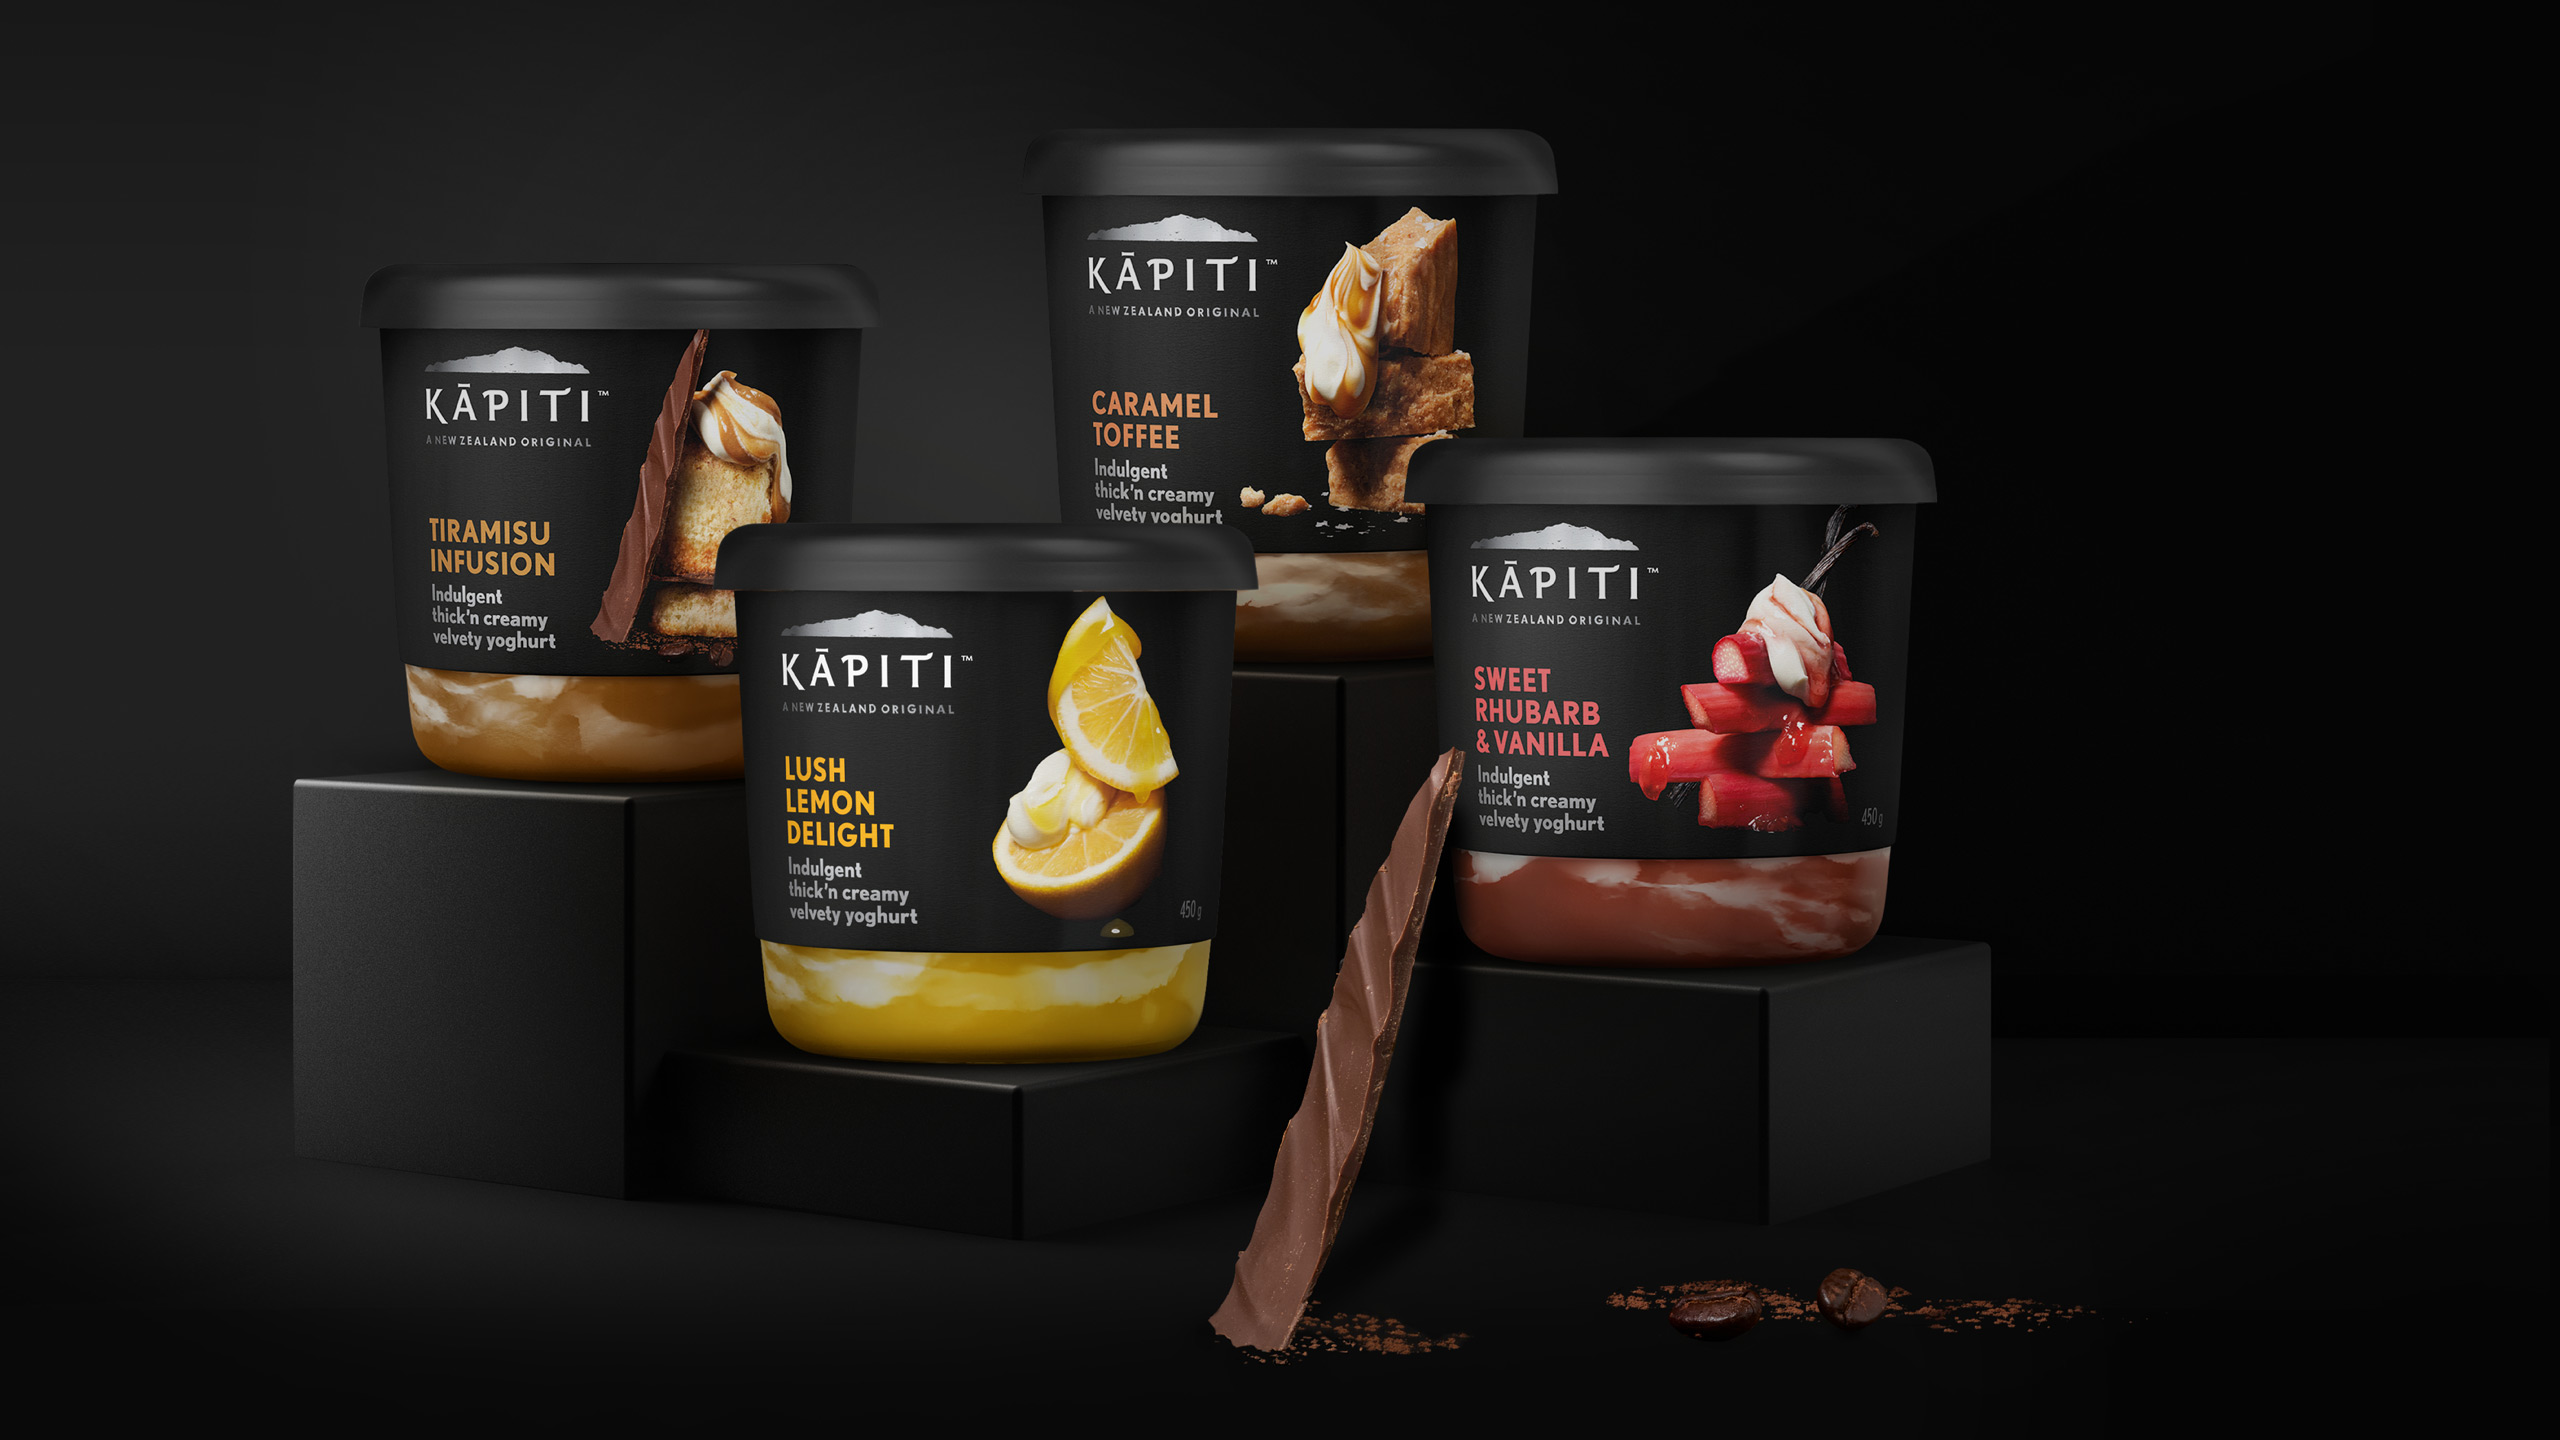 Tried&True Design Transforms Kāpiti Yoghurt with Premium Packaging Led by Quality Photography